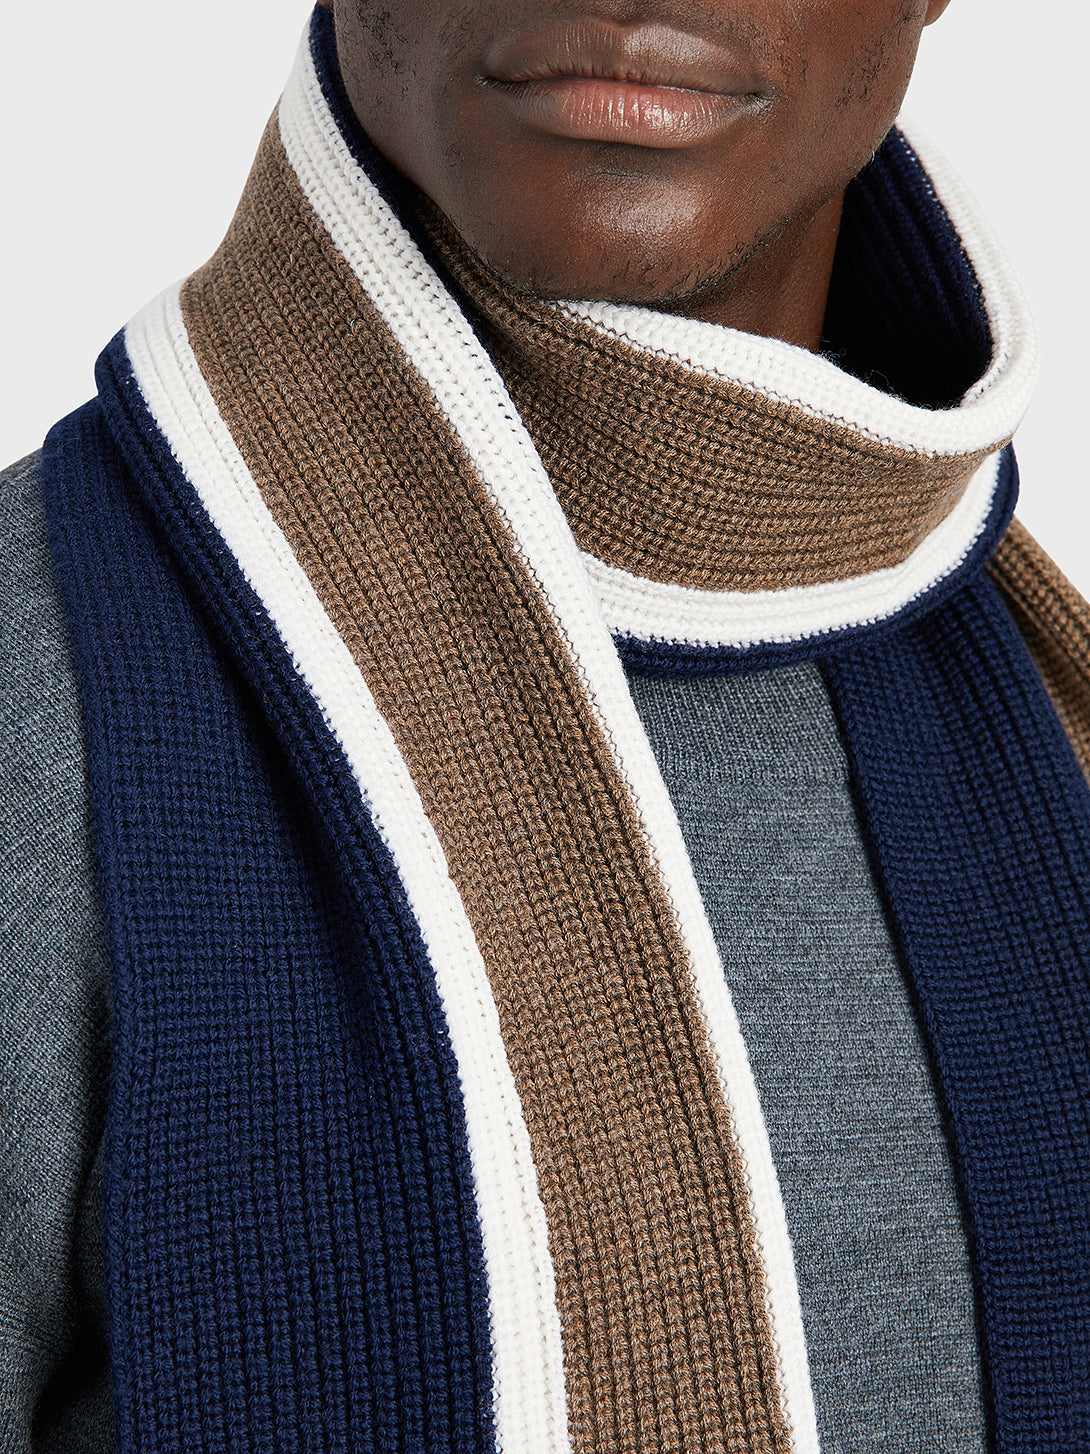 ONS Clothing Men's scarf in NAVY STRIPE black friday deals